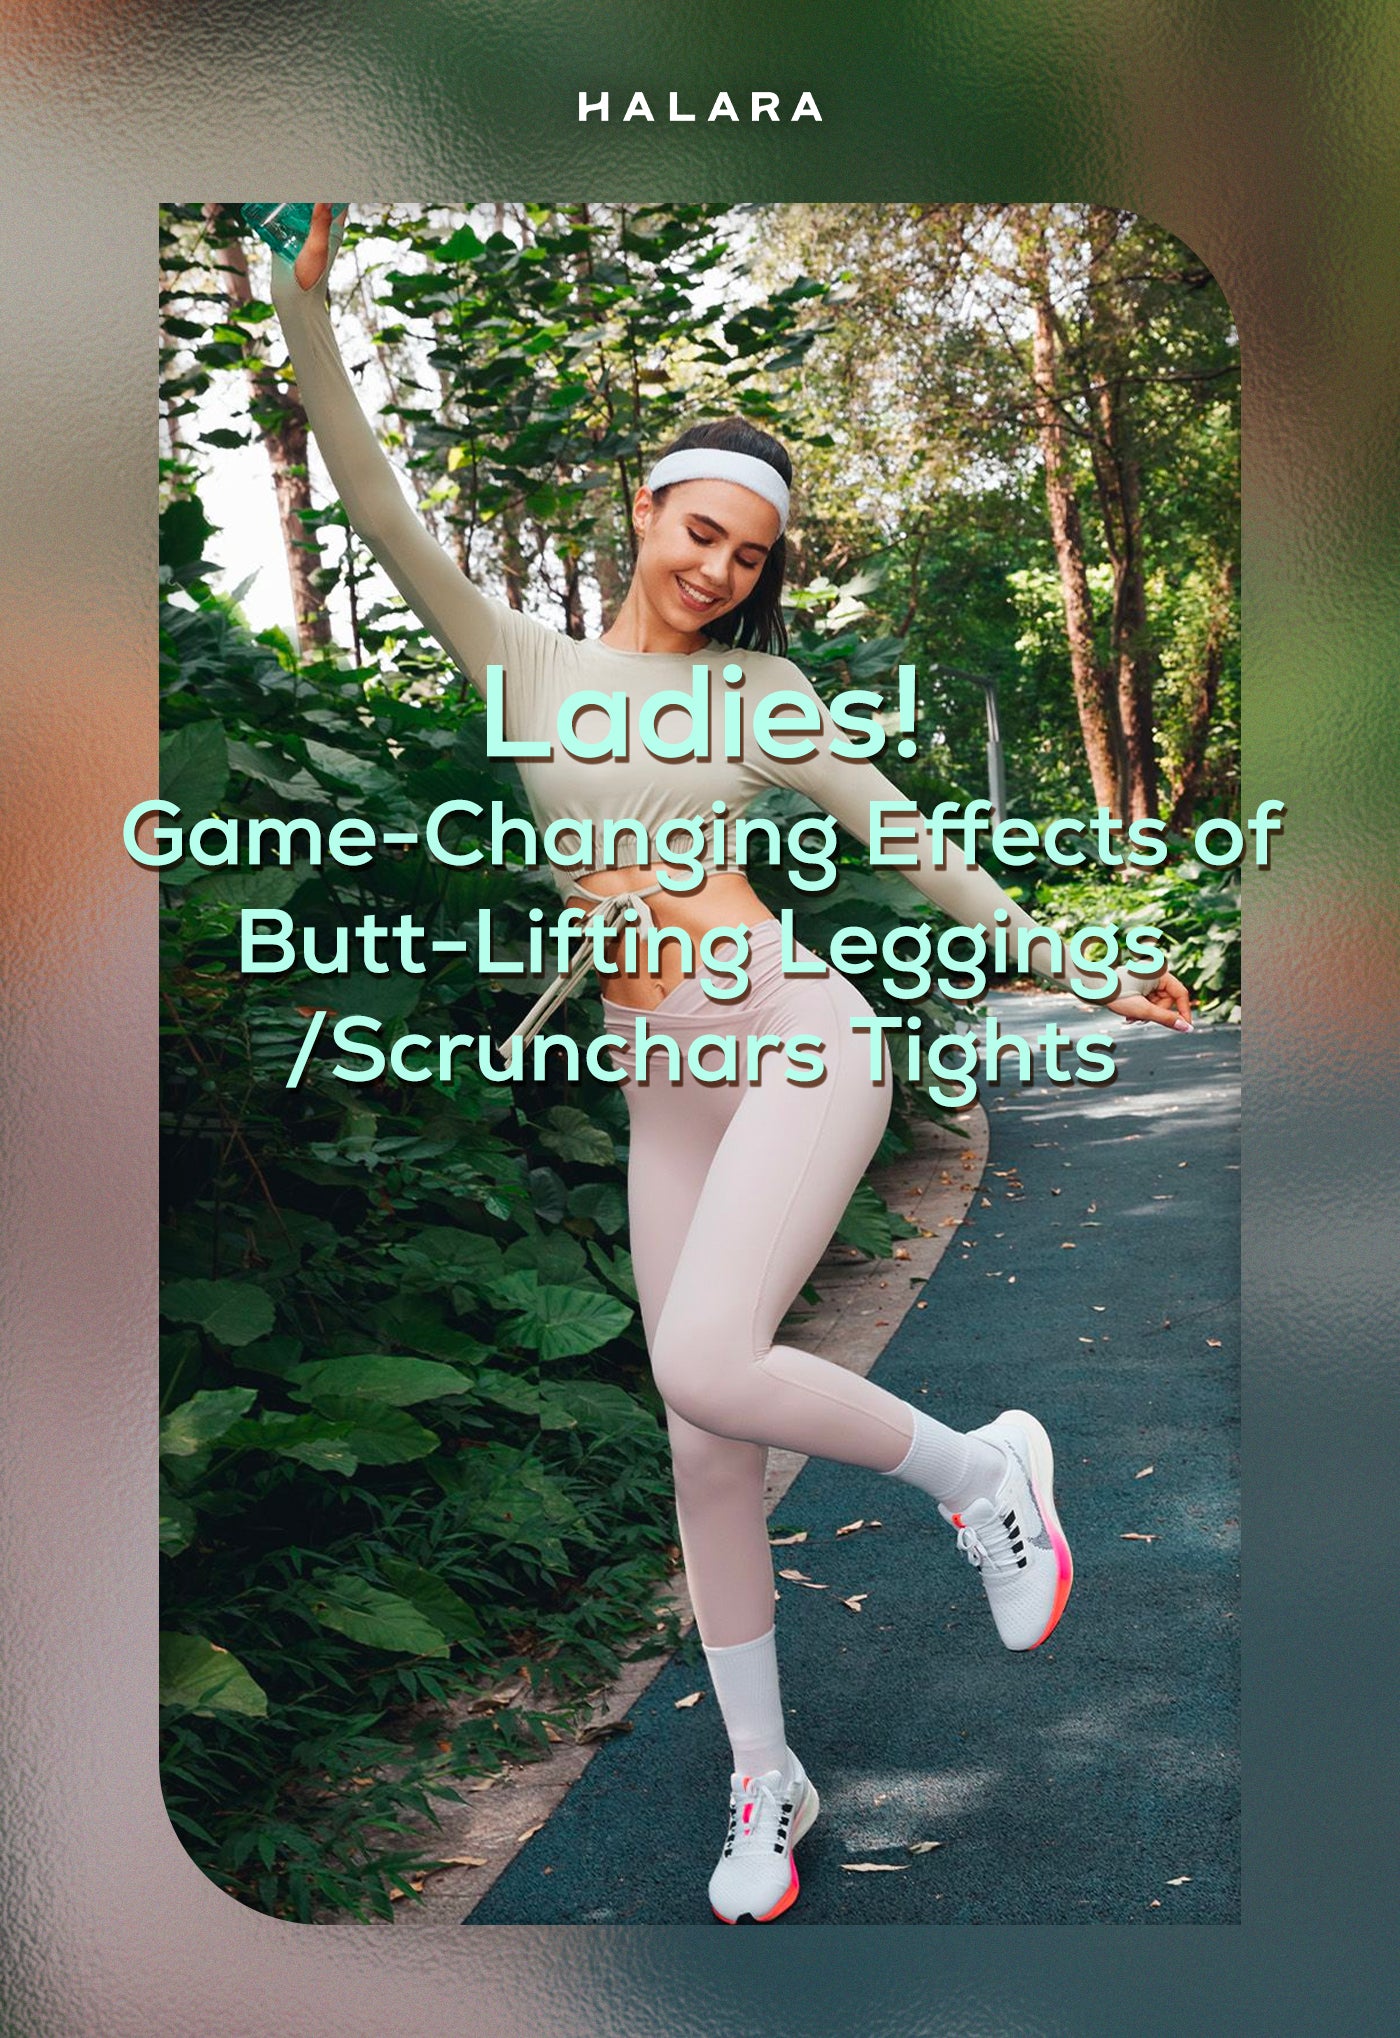 Ladies! Game-Changing Effects of Butt-Lifting Leggings/Scrunchars Tights